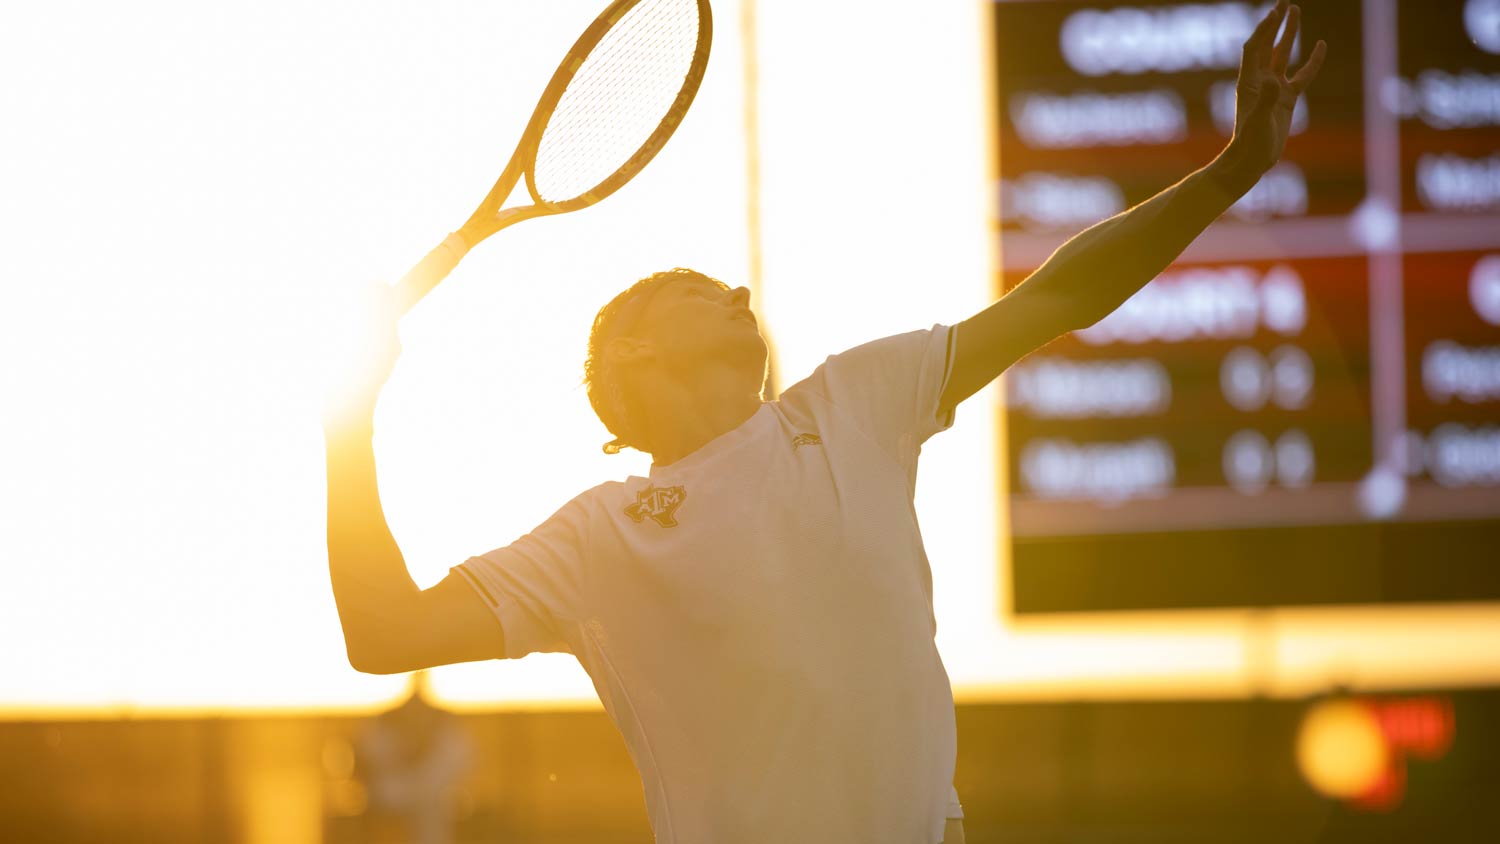 A tennis player serves the ball with a sunset in the background